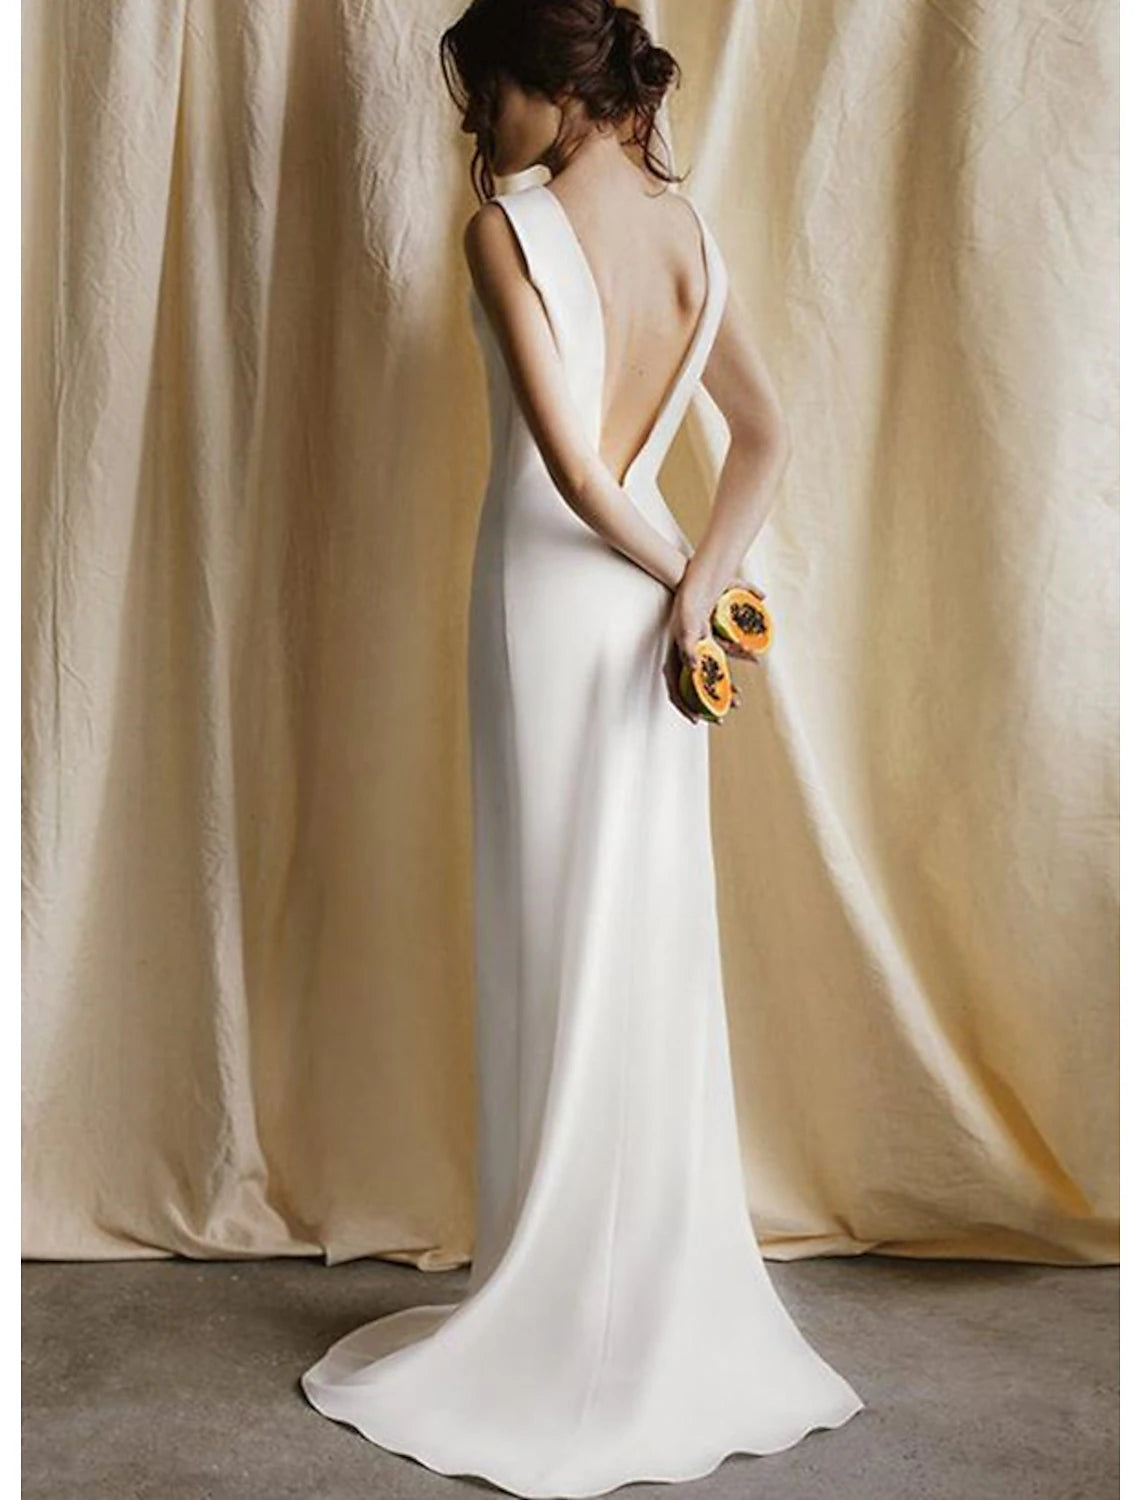 Reception Open Back Casual Wedding Dresses Sheath / Column Scoop Neck Sleeveless Sweep / Brush Train Satin Bridal Gowns With Solid Color